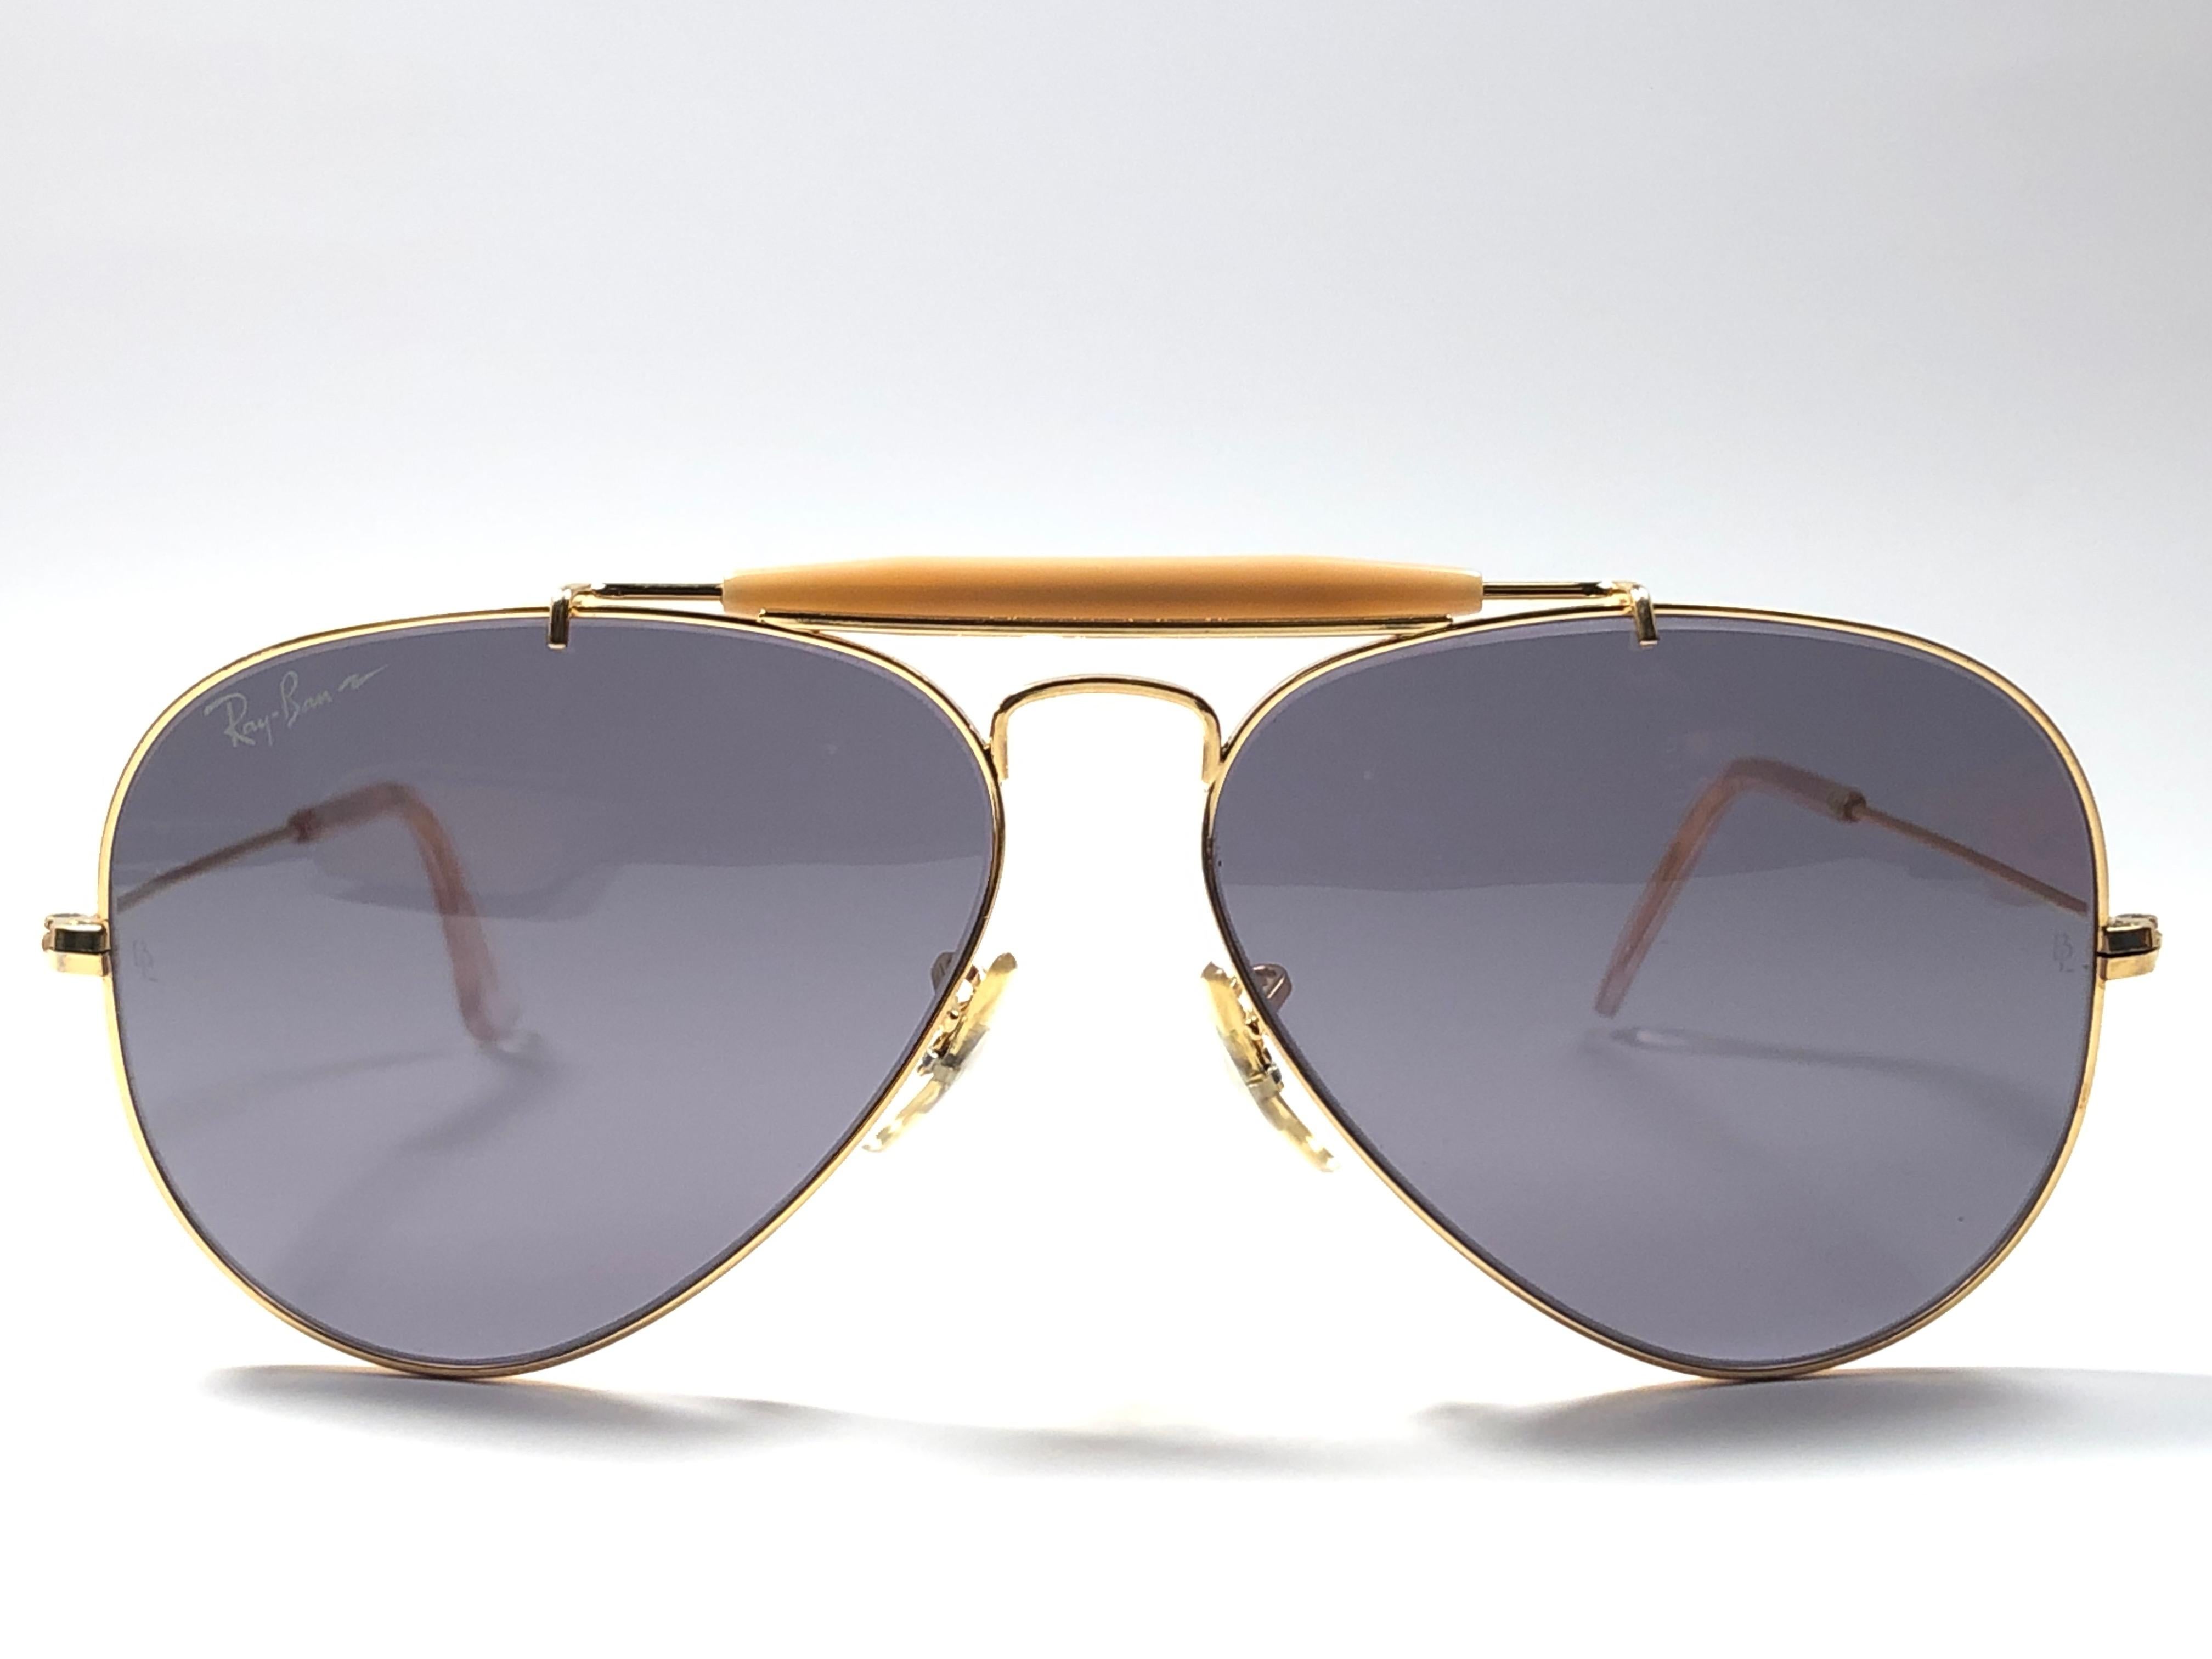 Vintage Ray Ban Outdoorsman gold 58MM frame with G20 Grey lenses.
This item is preowned, therefore have light scratches on the lenses, the frame is in near perfect condition with no repairs or structural damages. Original Ray Ban B&L case.